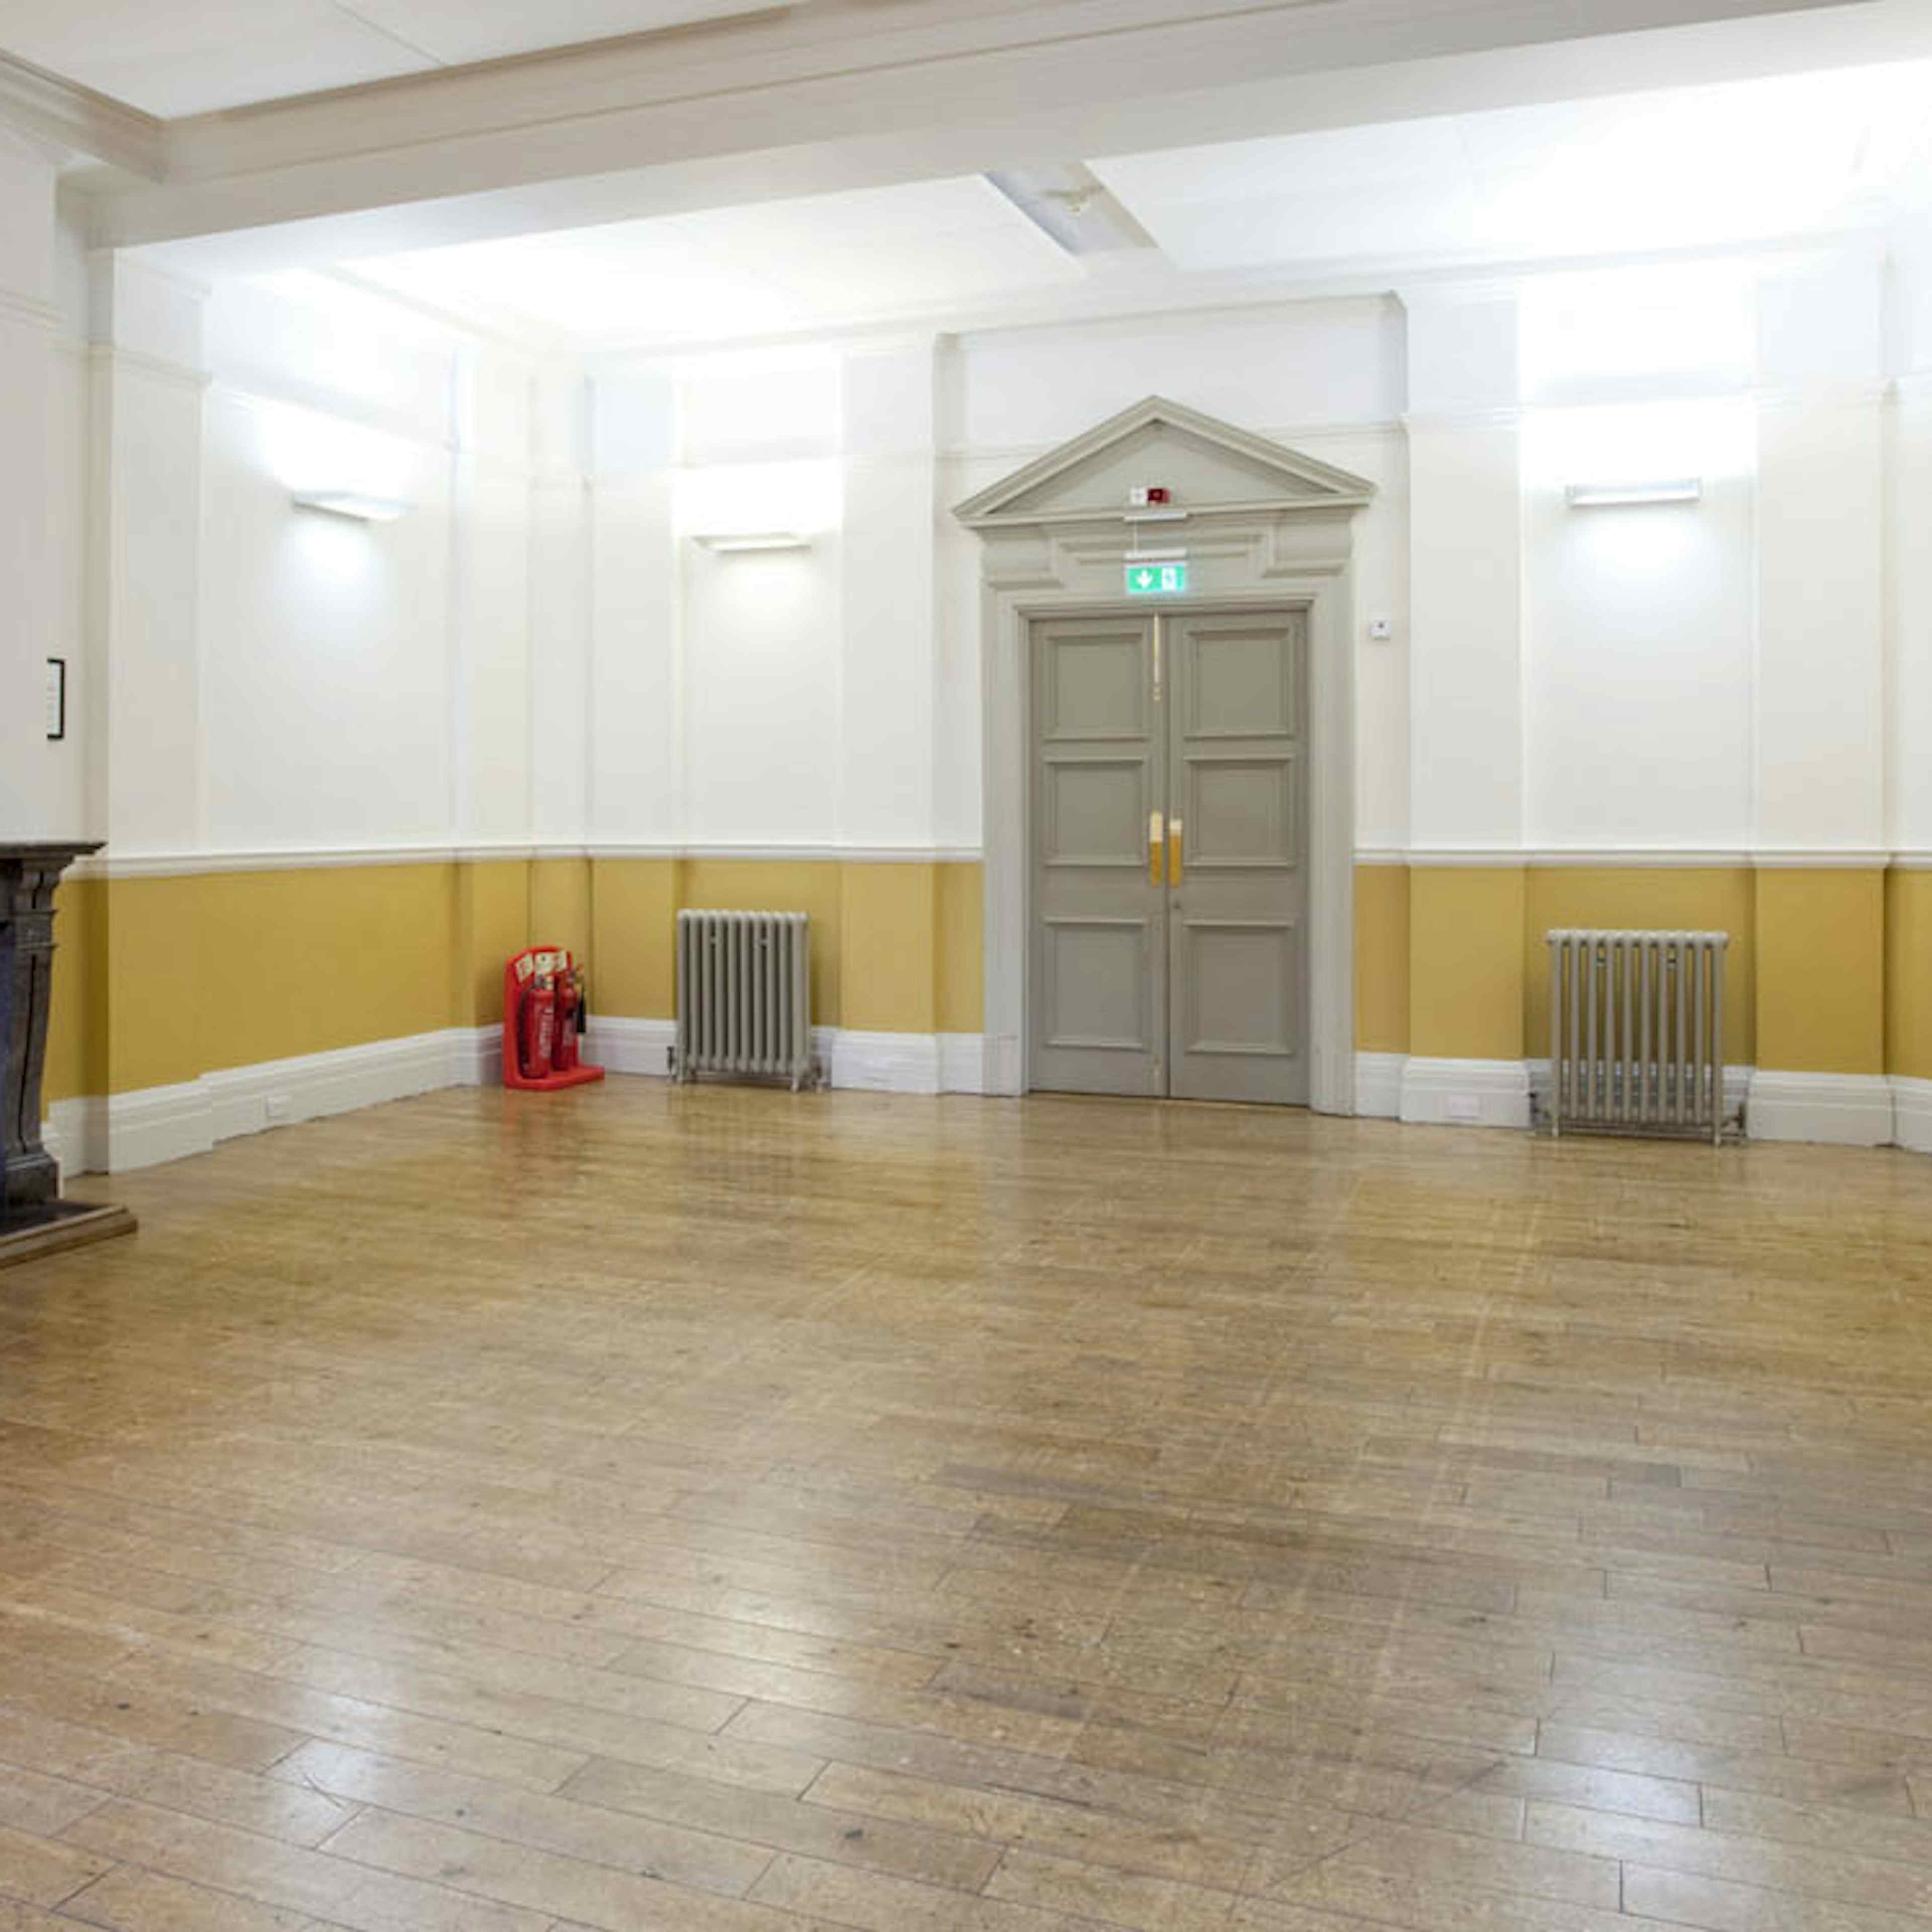 Shoreditch Town Hall - image 3